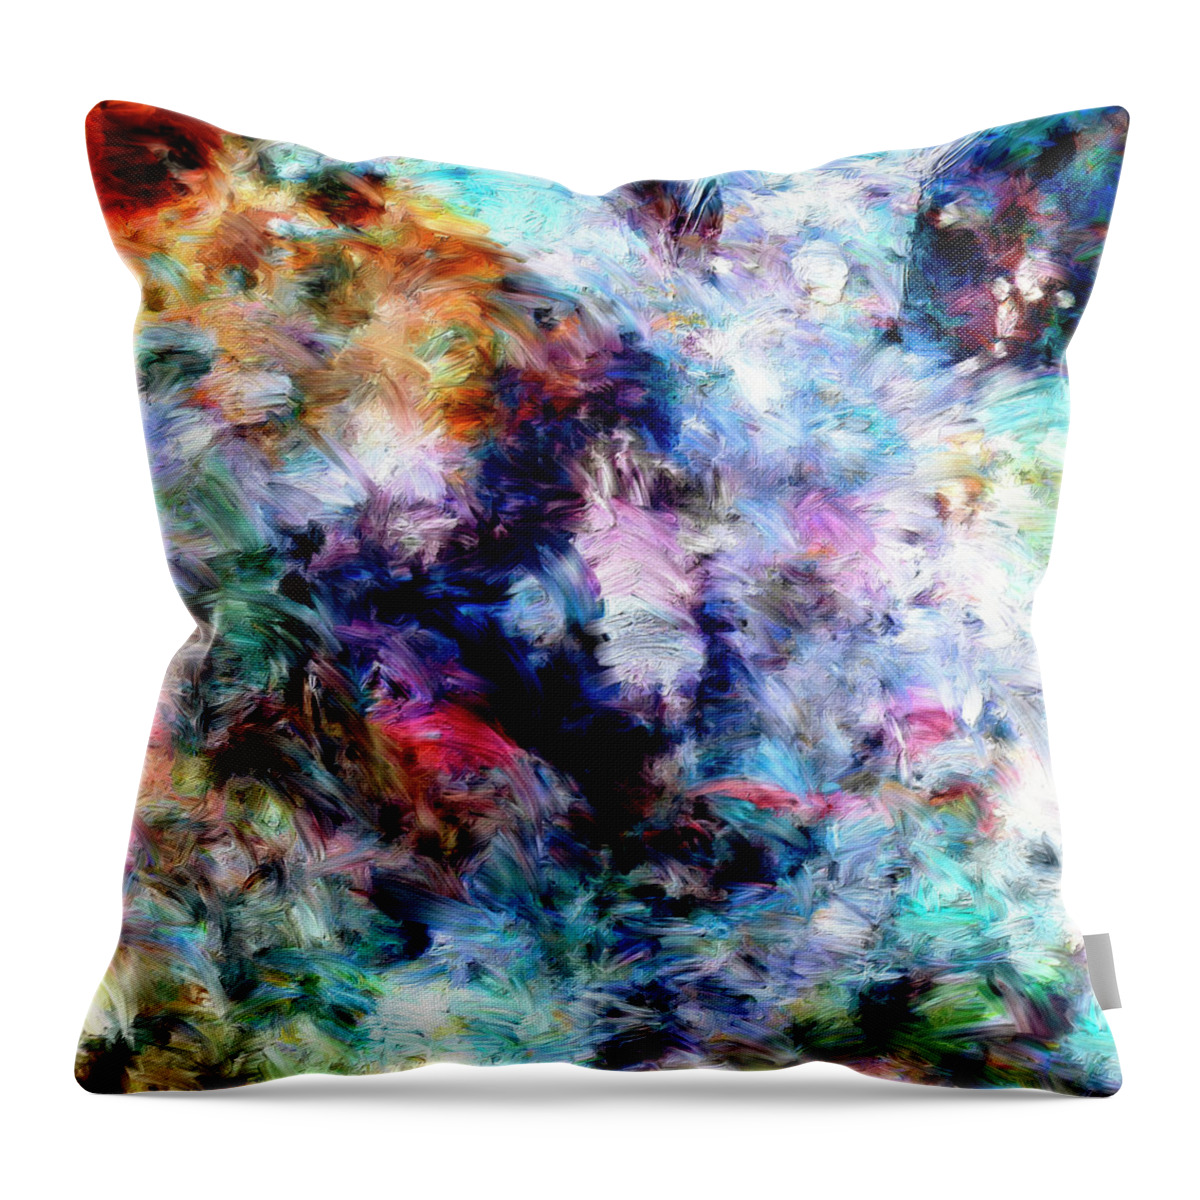 Abstract Throw Pillow featuring the painting Third Bardo by Dominic Piperata